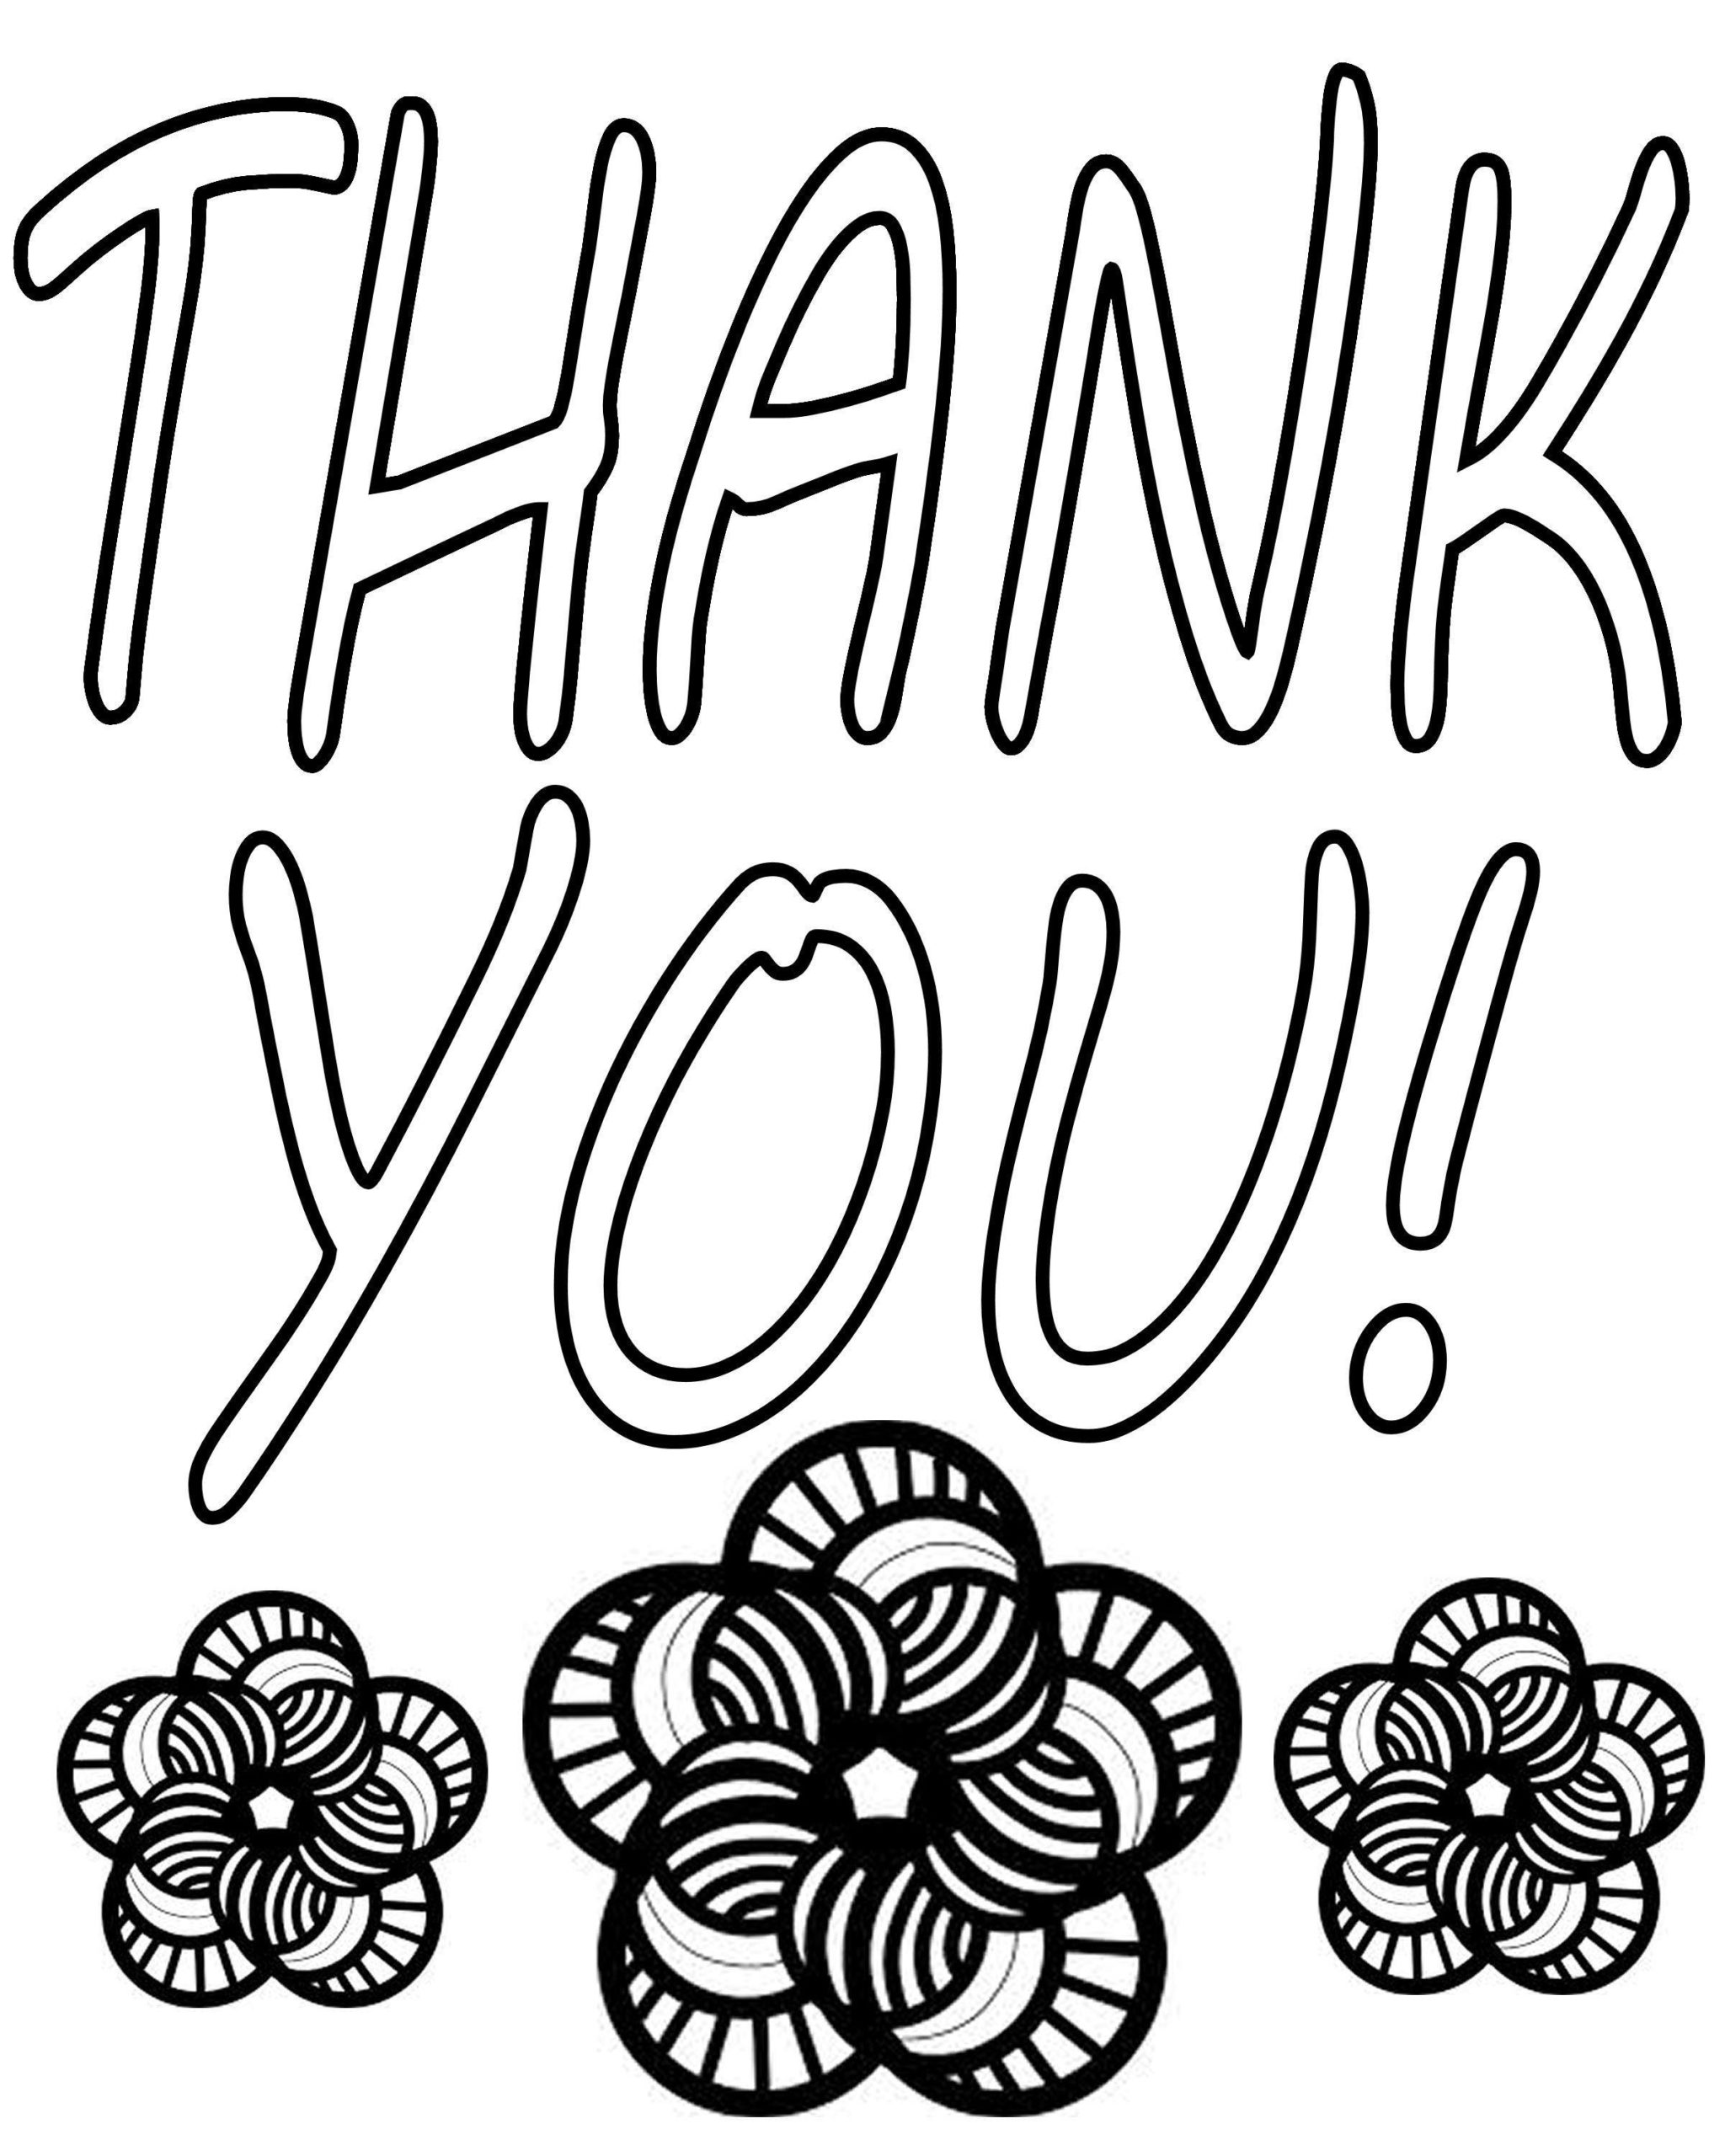 Please And Thank You Coloring Pages At GetColorings 